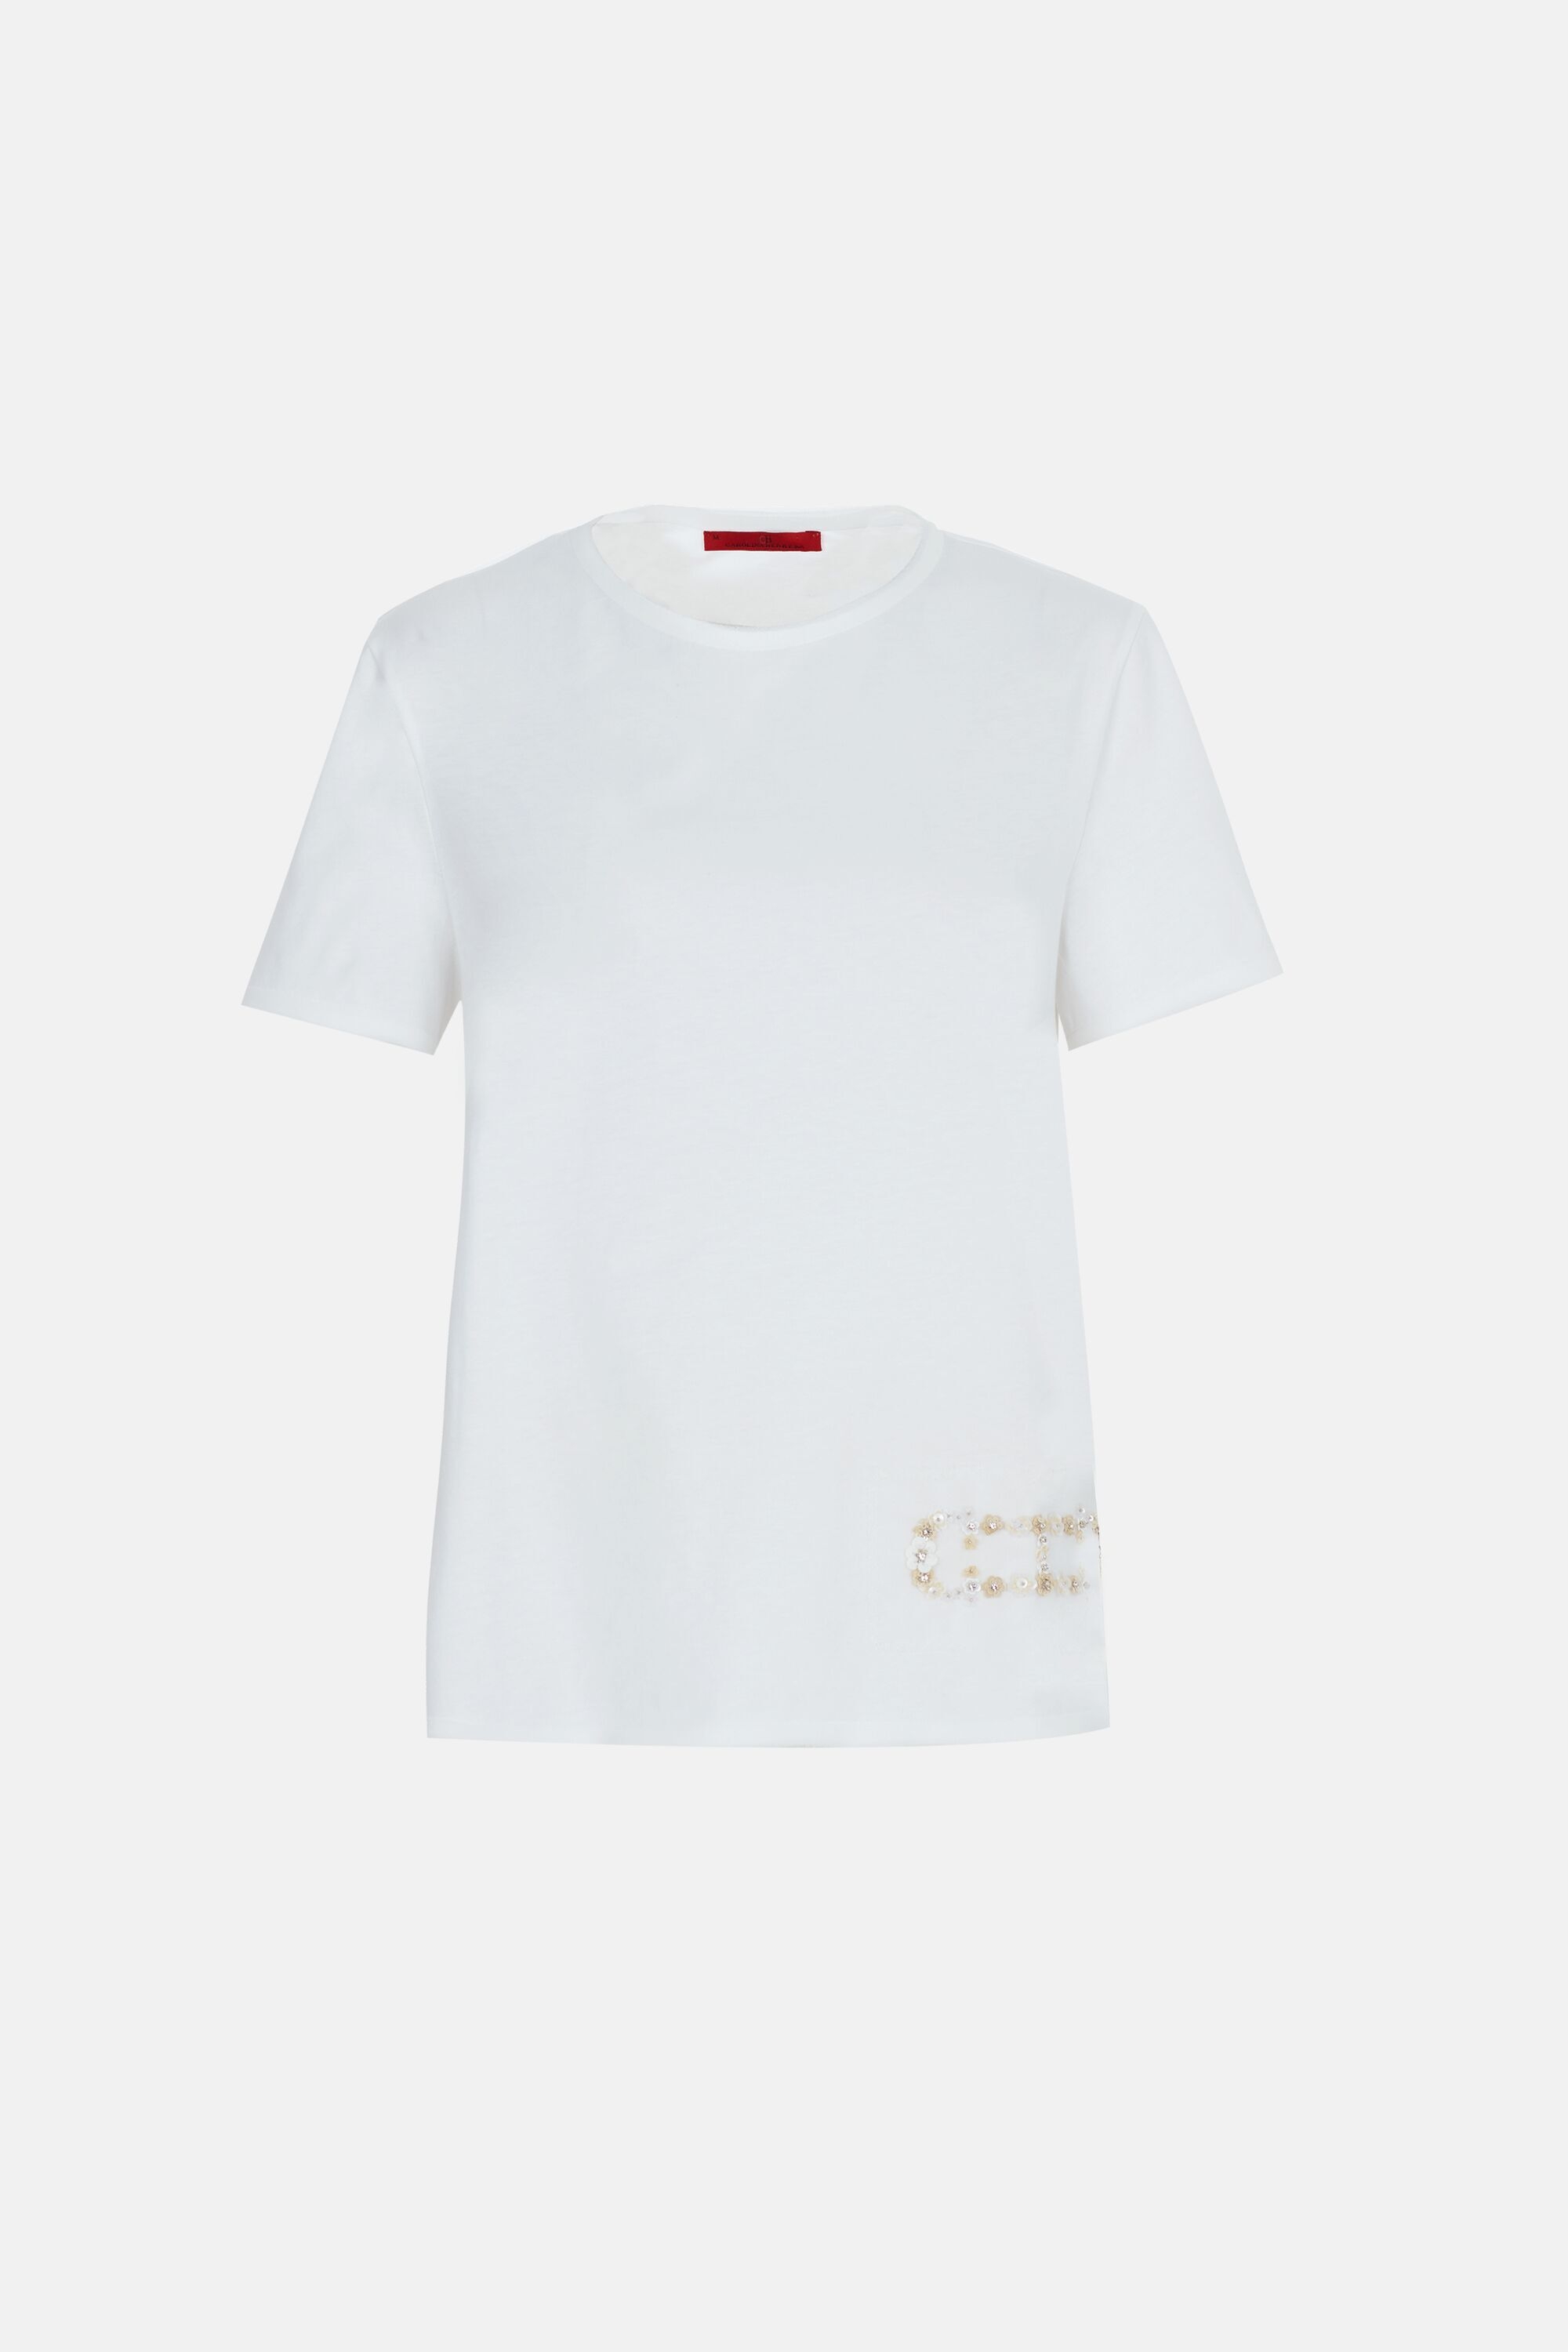 Initials Insignia t-shirt with sequins